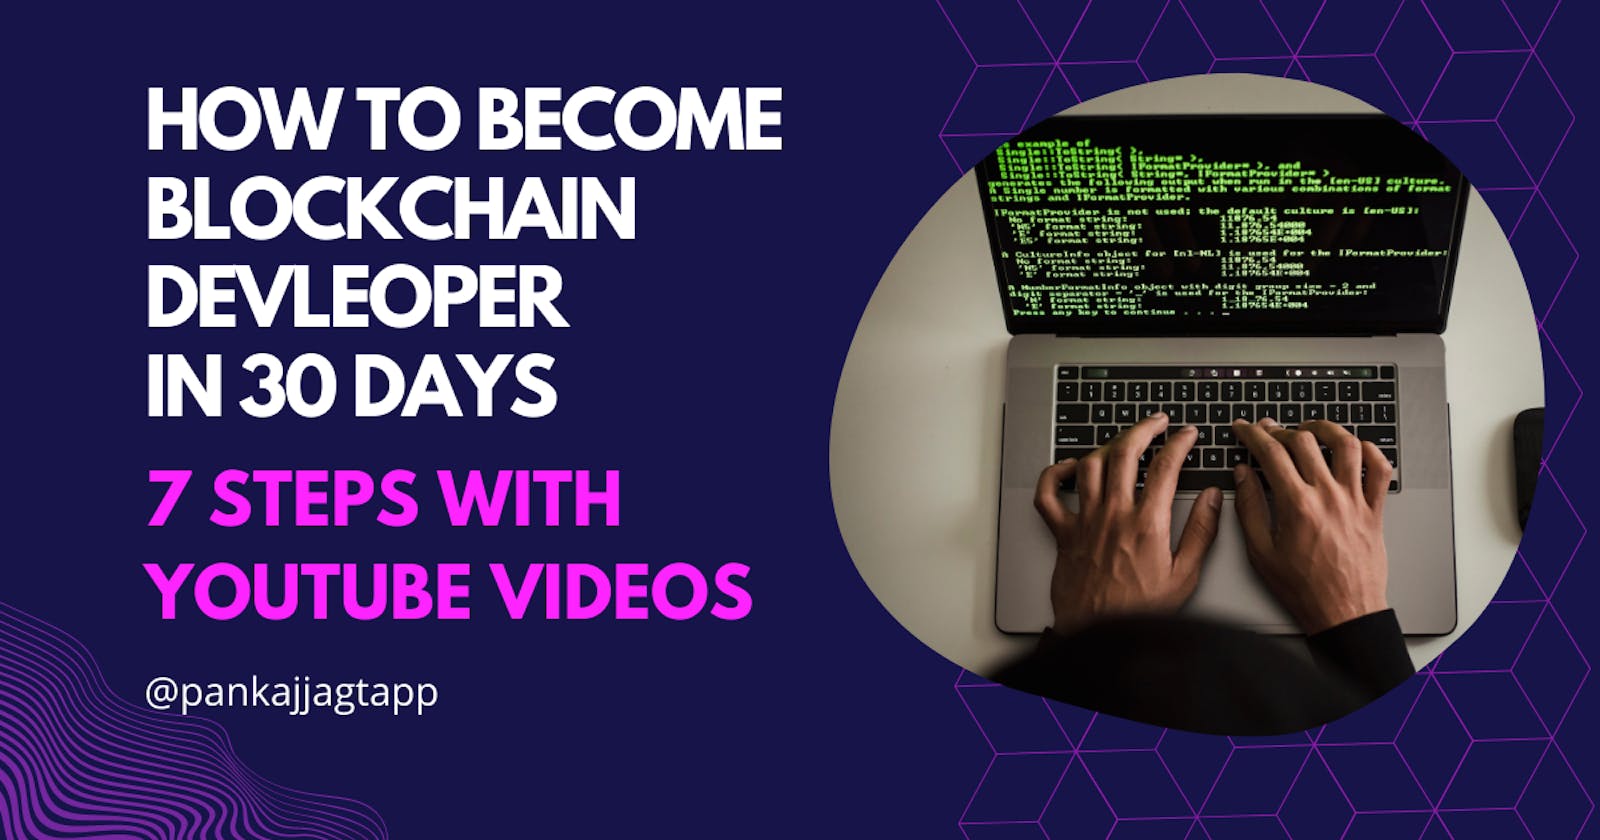 How to become Blockchain Developer in 30 Days (by FREE Youtube Videos) with 7 Steps